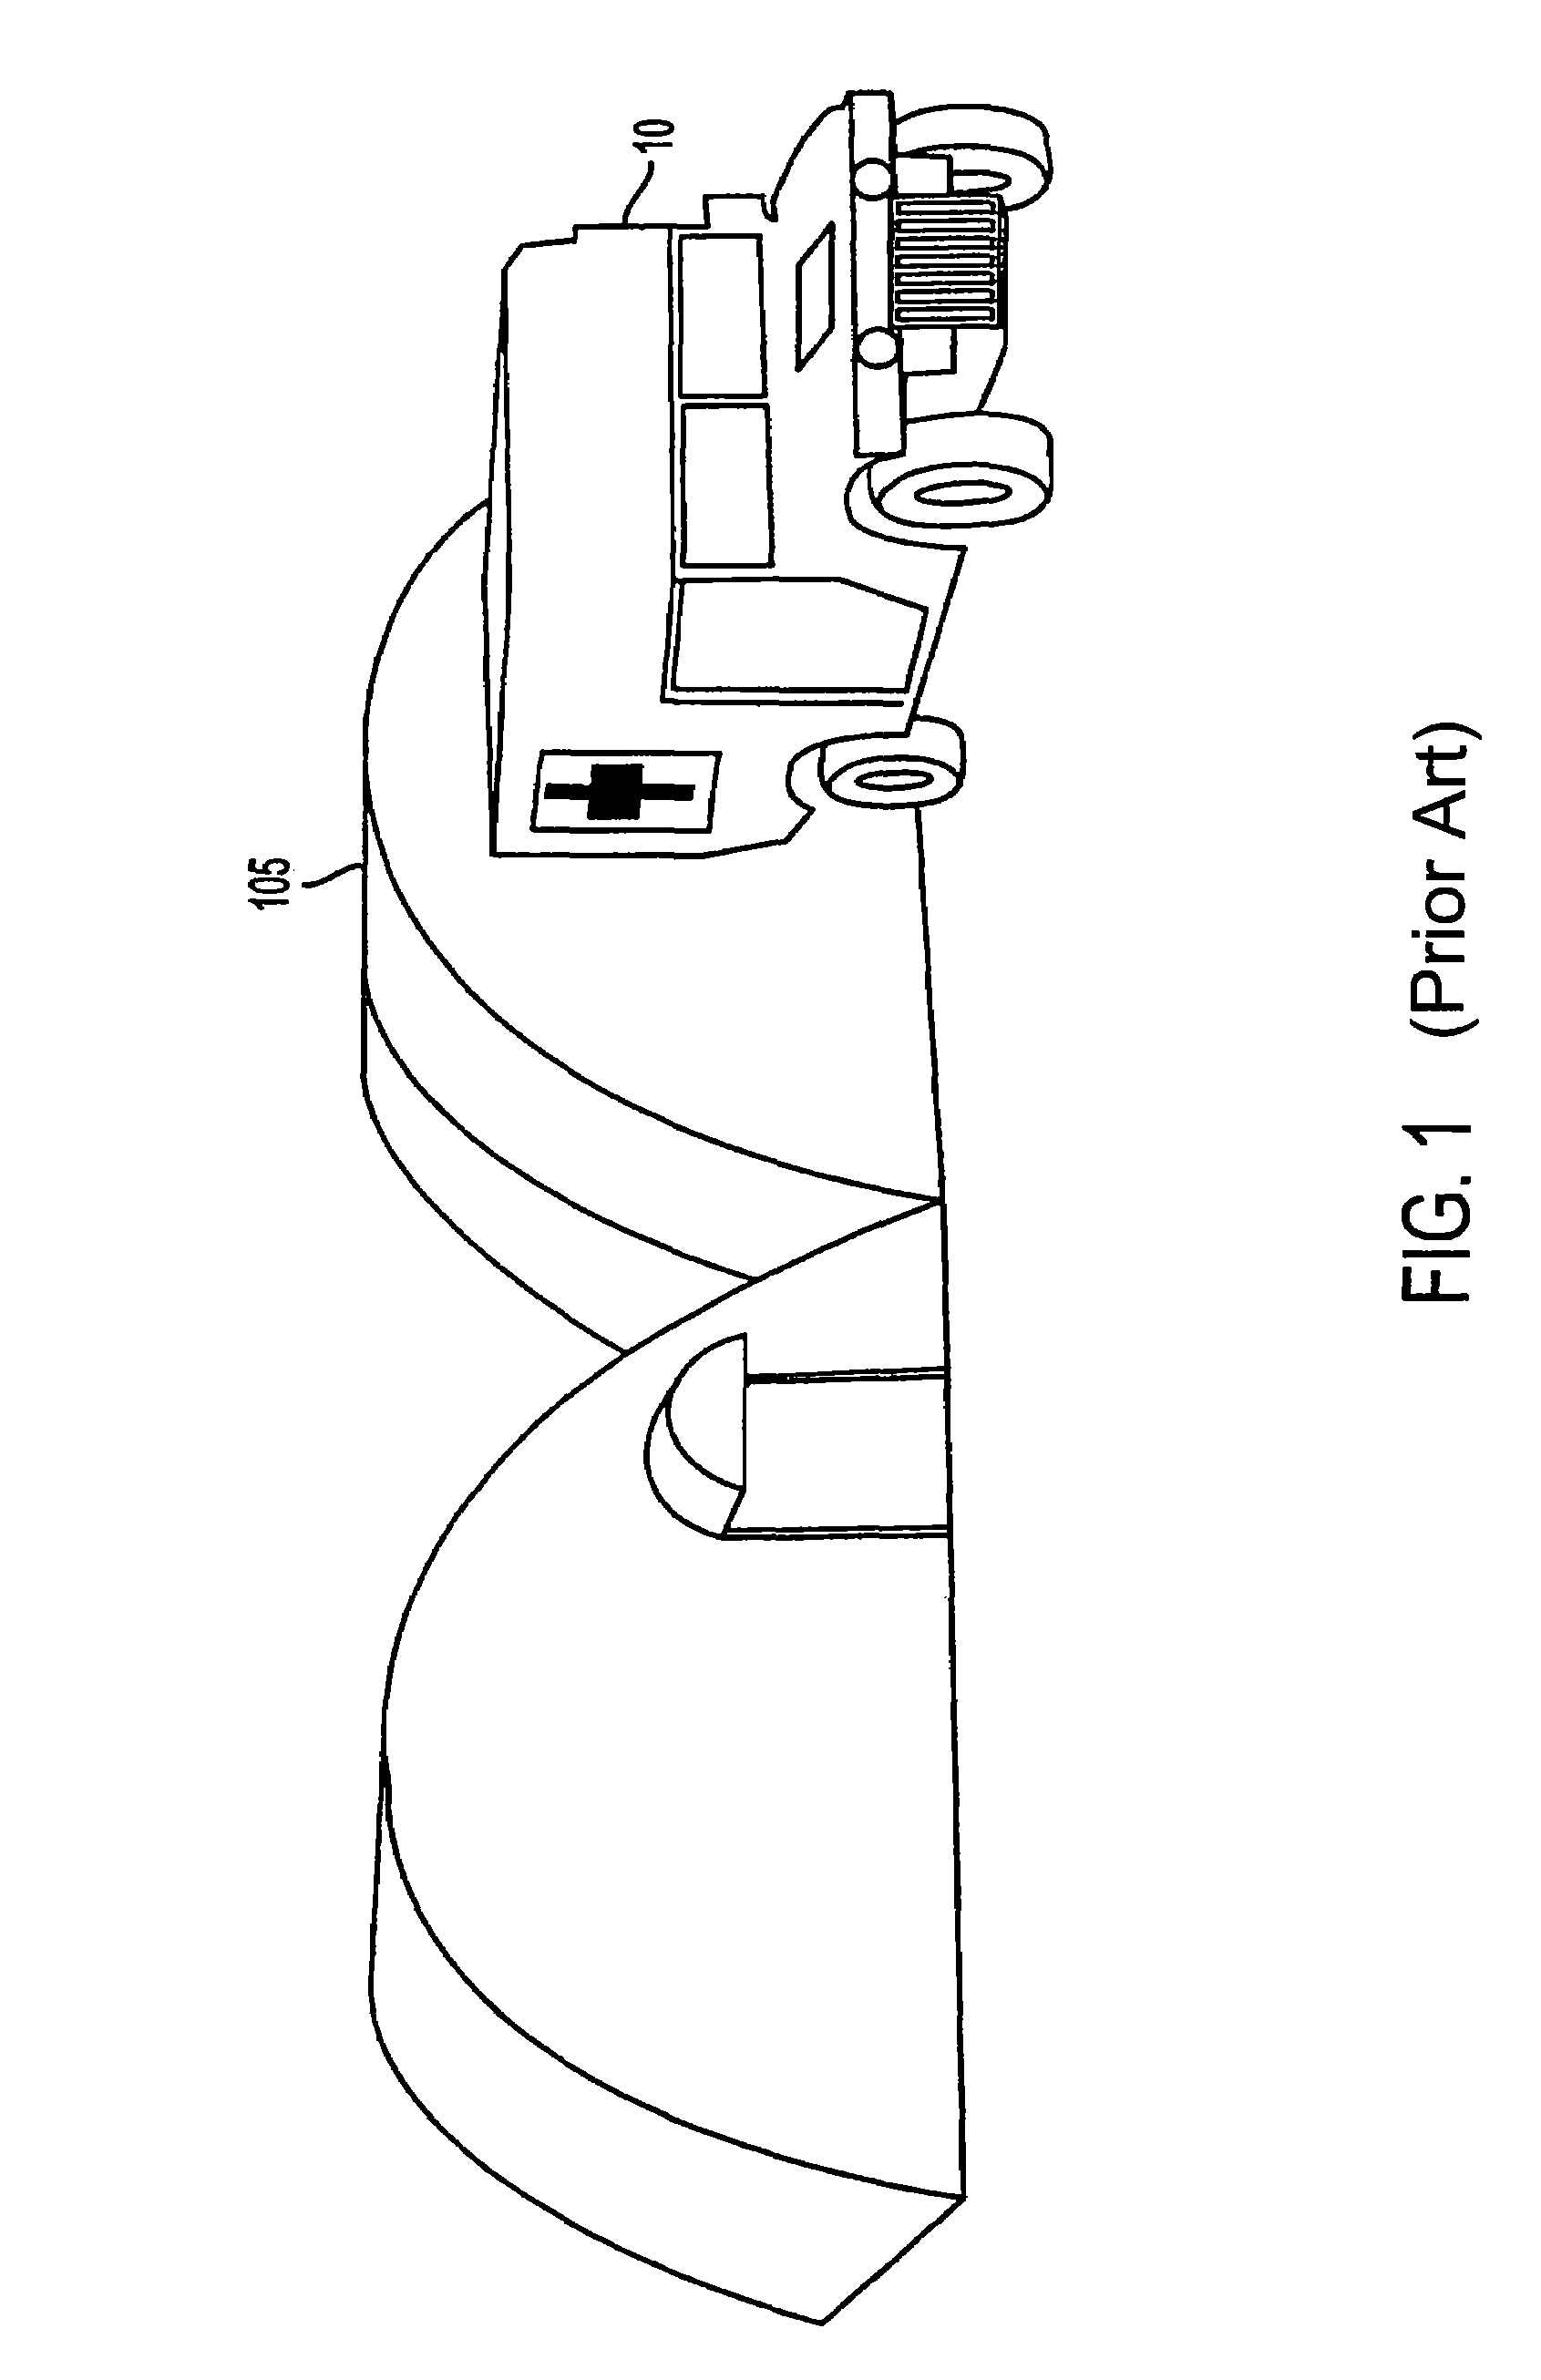 Apparatus for monitoring and controlling an isolation shelter and providing diagnostic and prognostic information